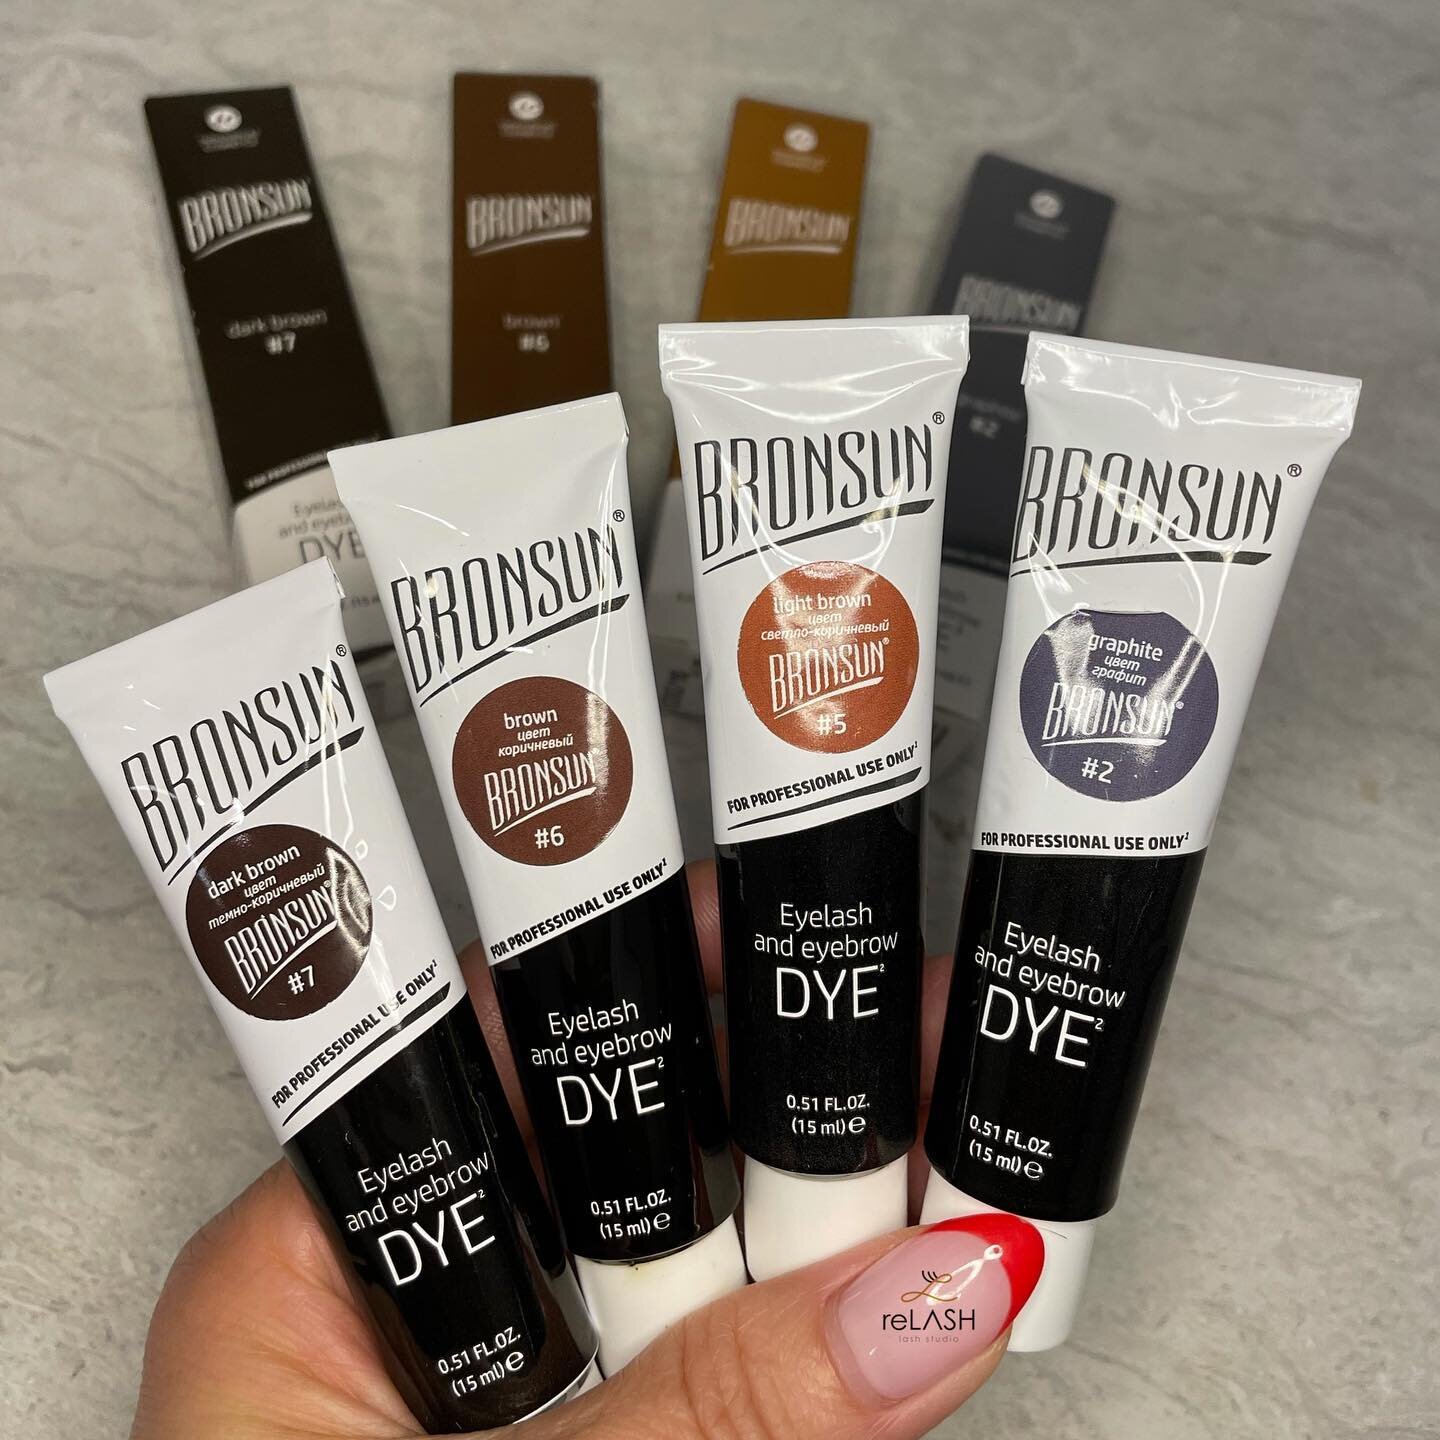 Bronsun Hybrid Tint the first extra long lasting eyebrow and eyelash gel dye with henna effect now available! 

Have you been wanting to try this product and have questions? Feel free to ask in the comments 🙂

Are you a lash or brow artist looking t